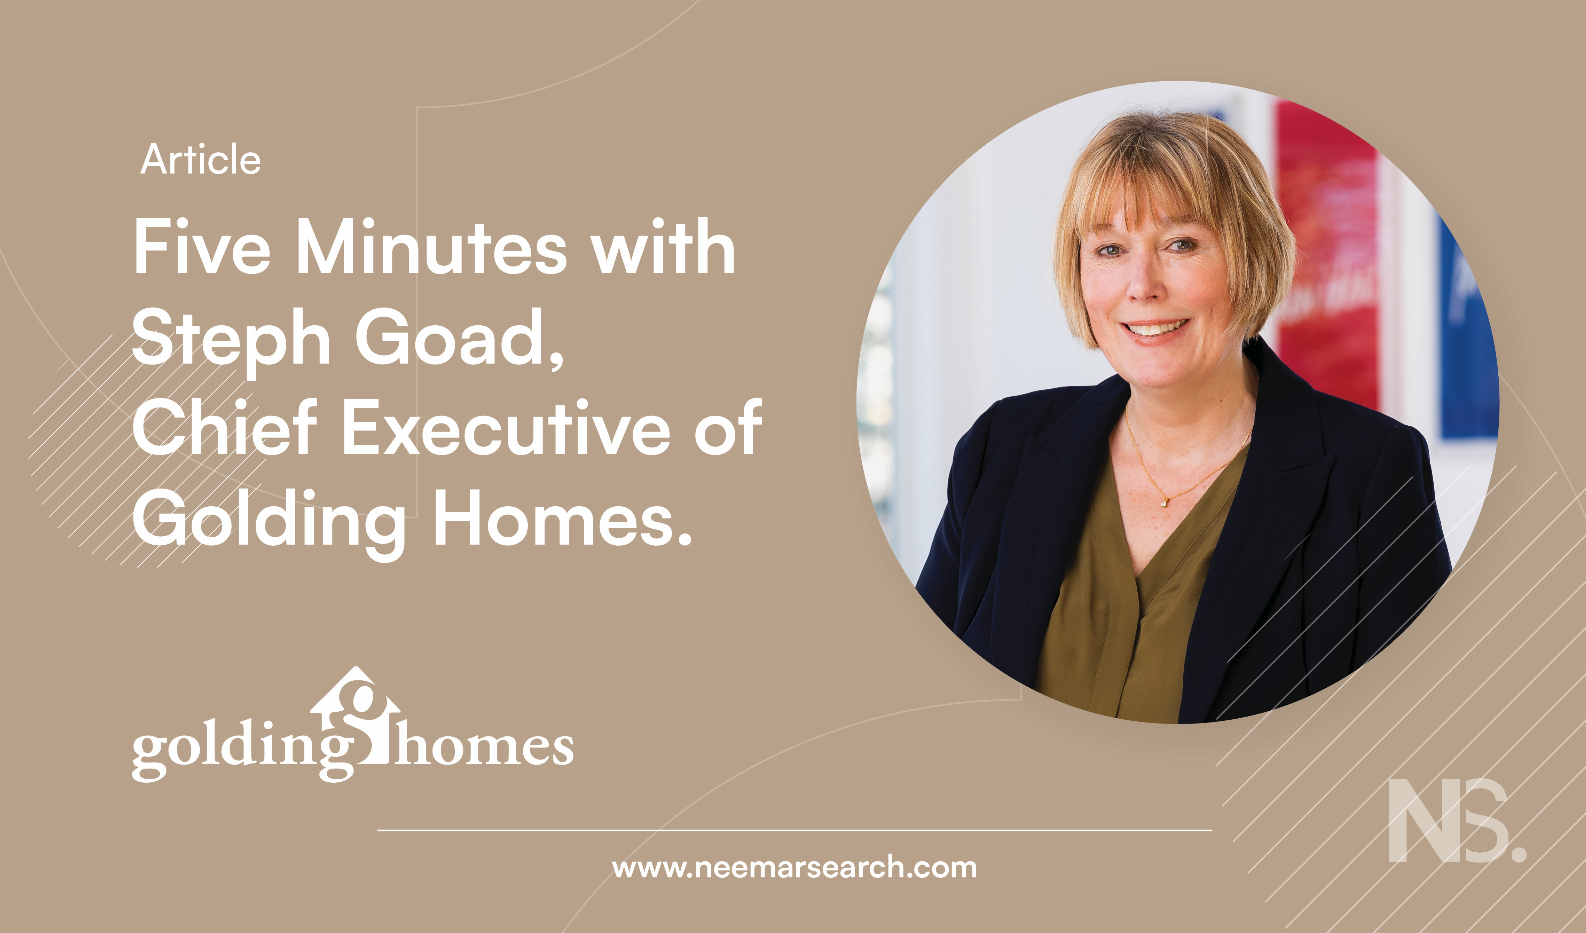 Five Minutes with Steph Goad, Chief Executive of Golding Homes